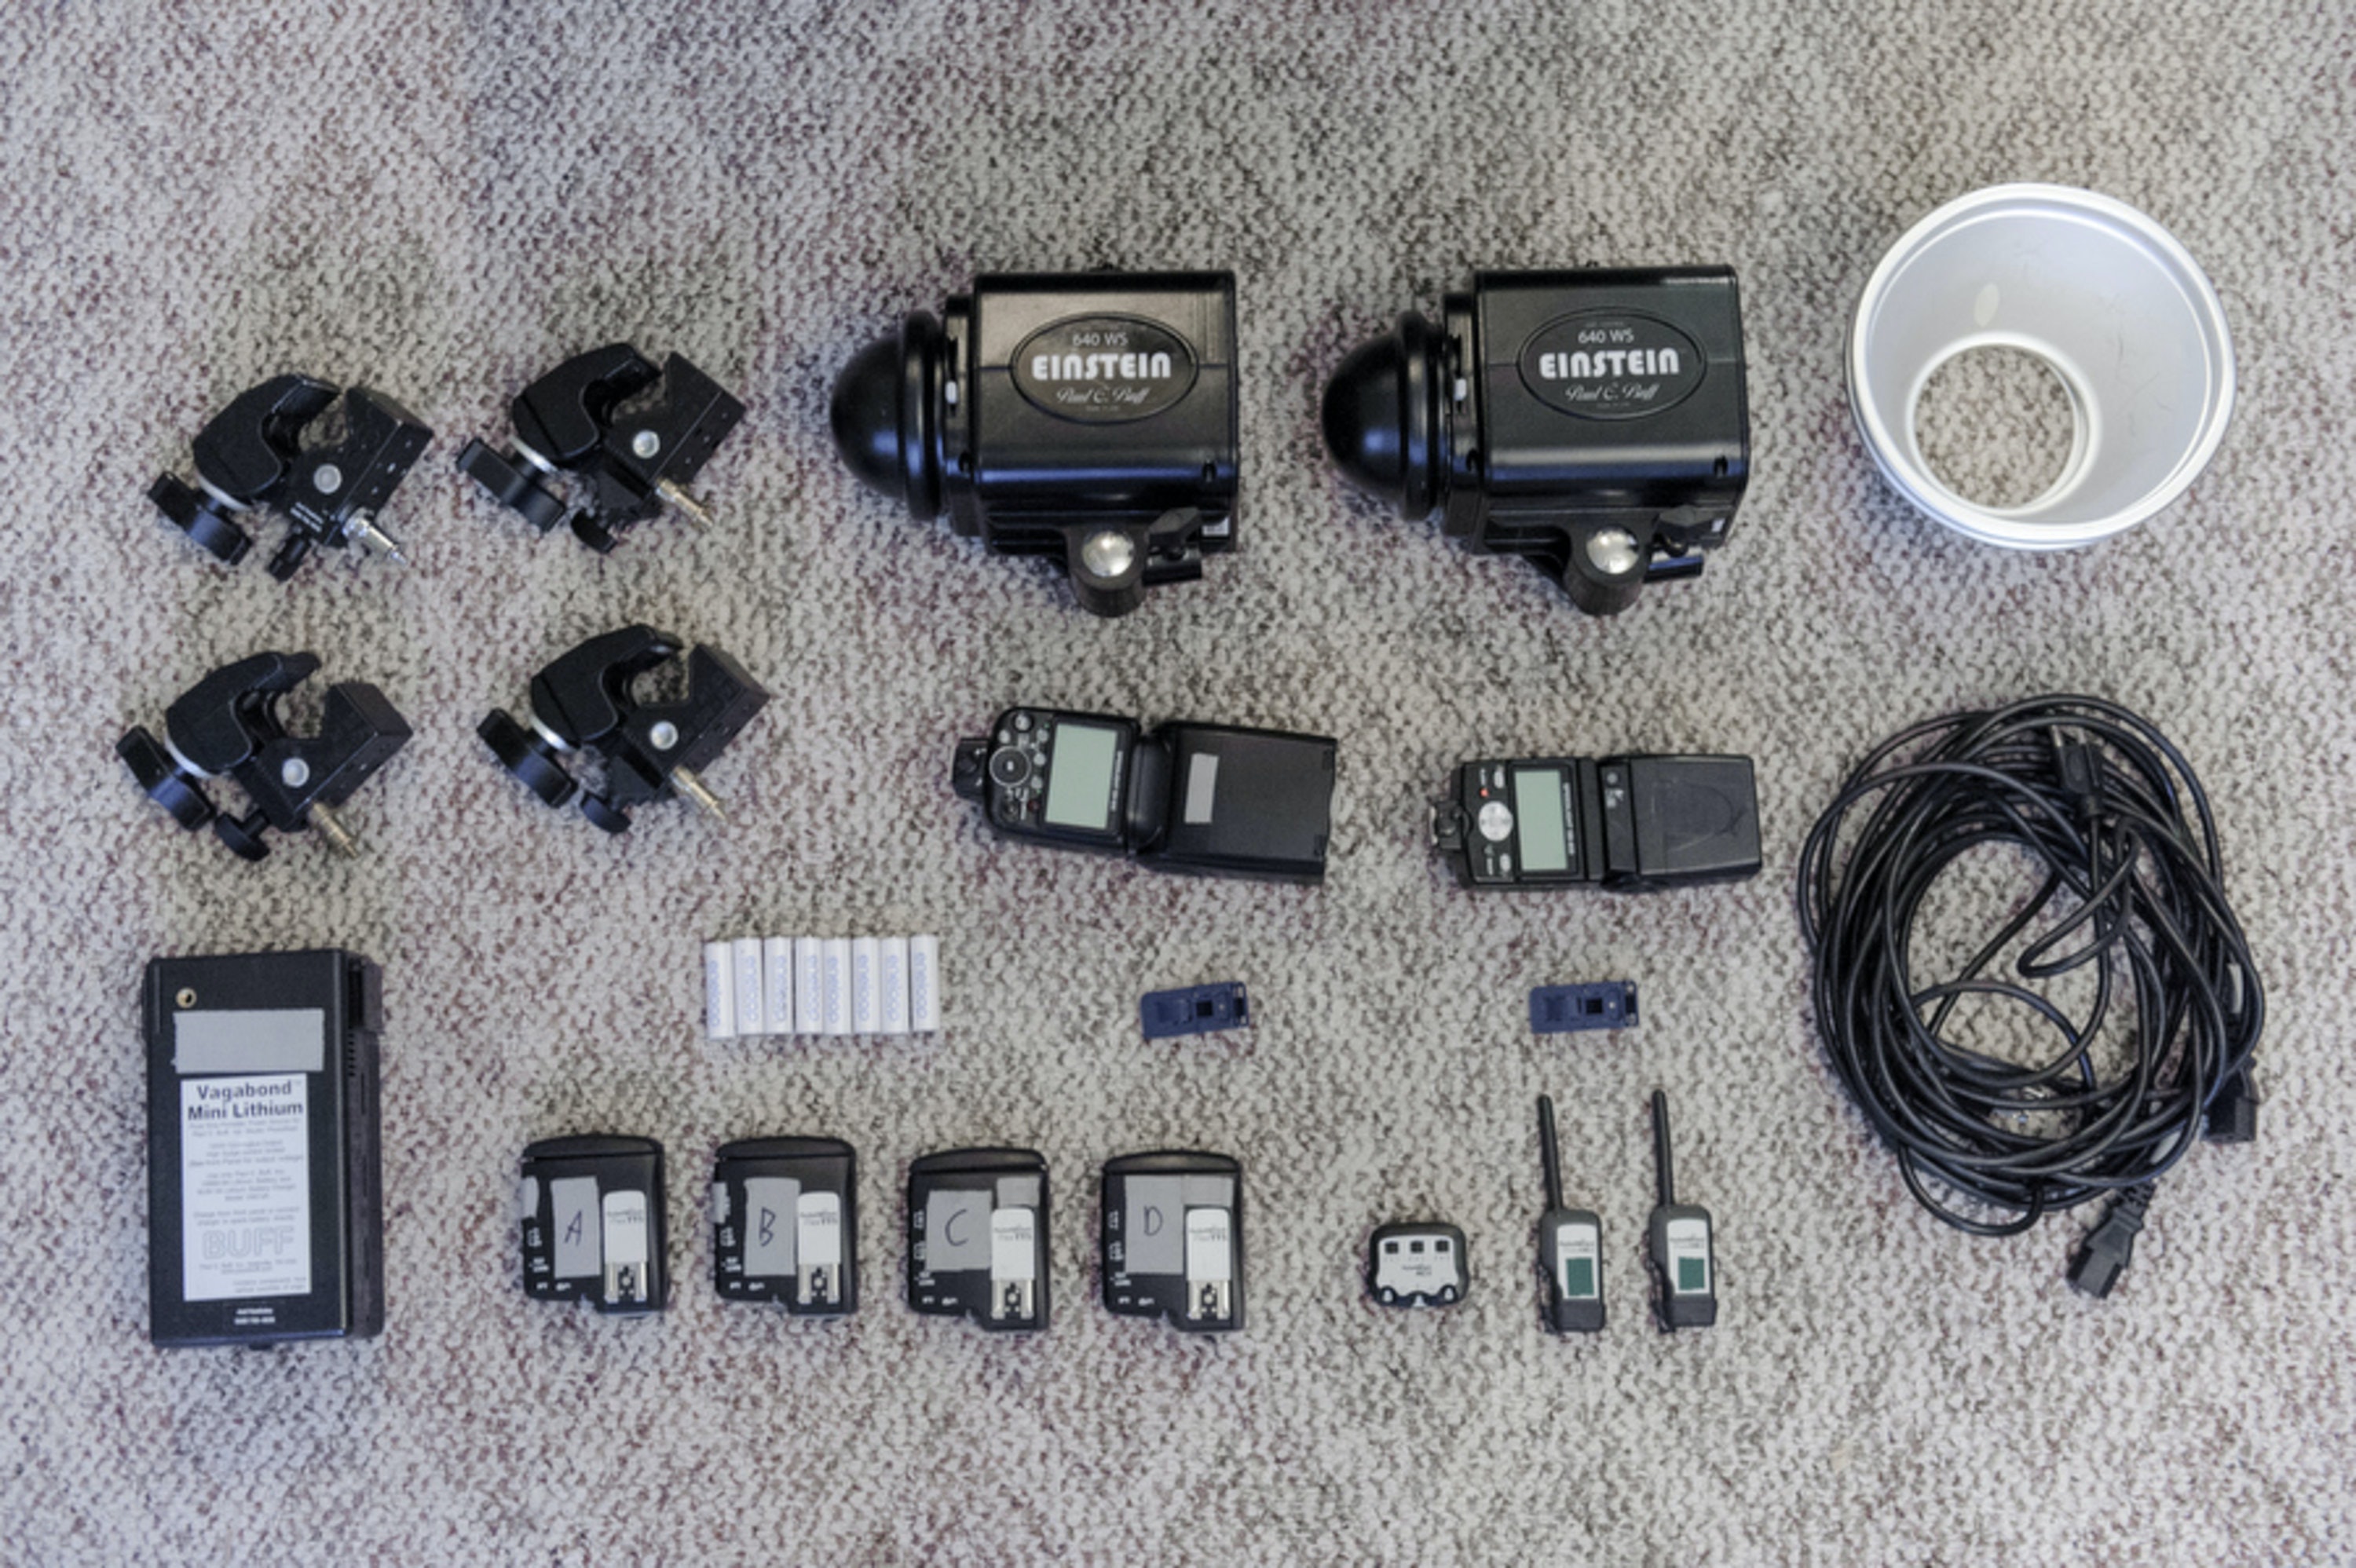 Lighting kit of speedlights and monolights used for basketball games